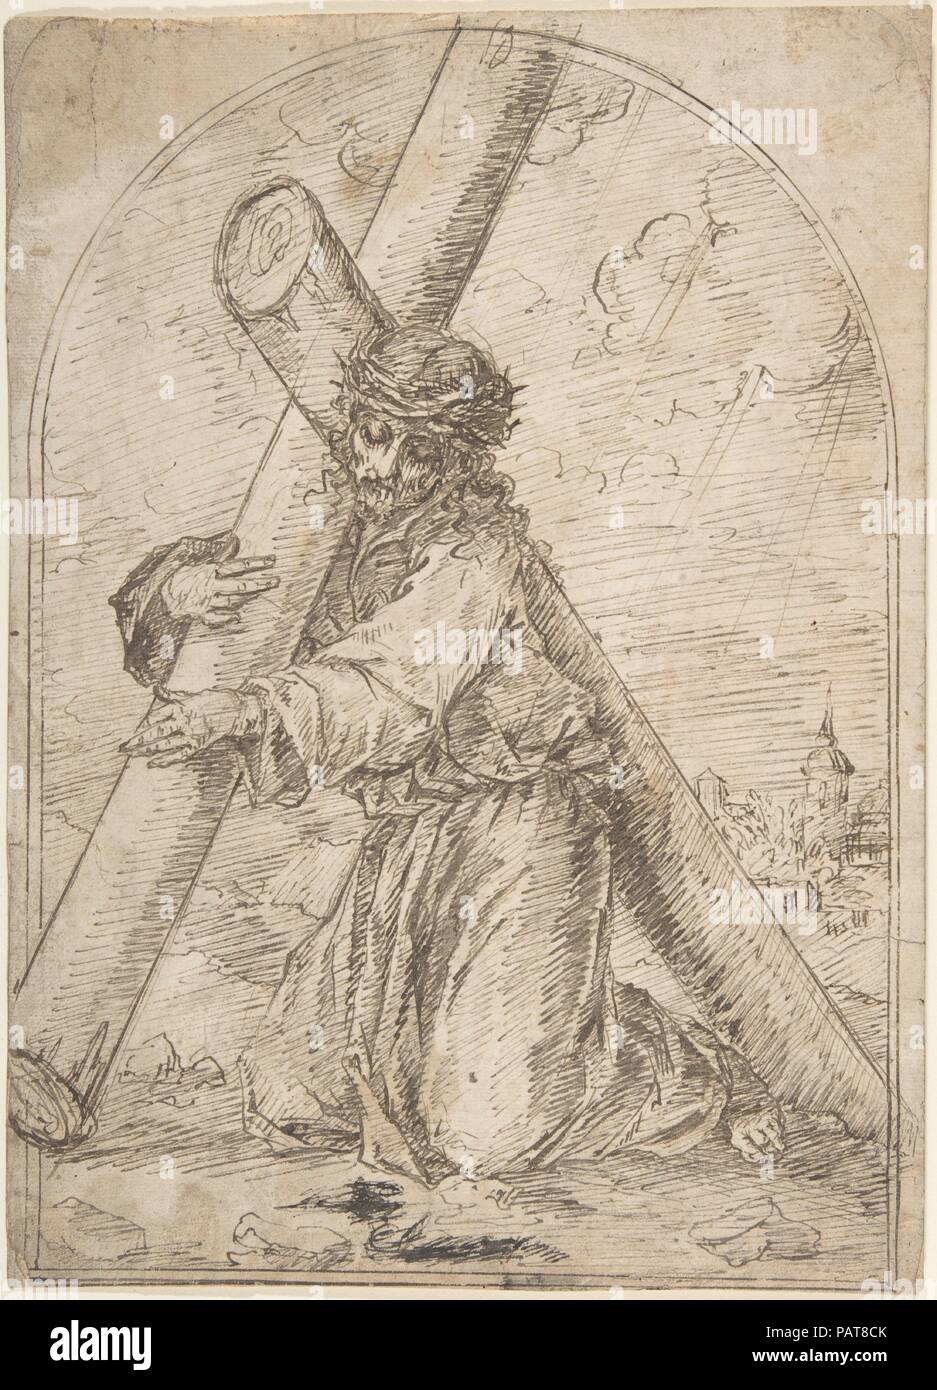 Christ Kneeling, Carrying the Cross. Artist: Anonymous, Spanish, 16th century. Dimensions: 11-3/8 x 8-1/4 in.  (28.9 x 21.0 cm). Date: 16th century. Museum: Metropolitan Museum of Art, New York, USA. Stock Photo